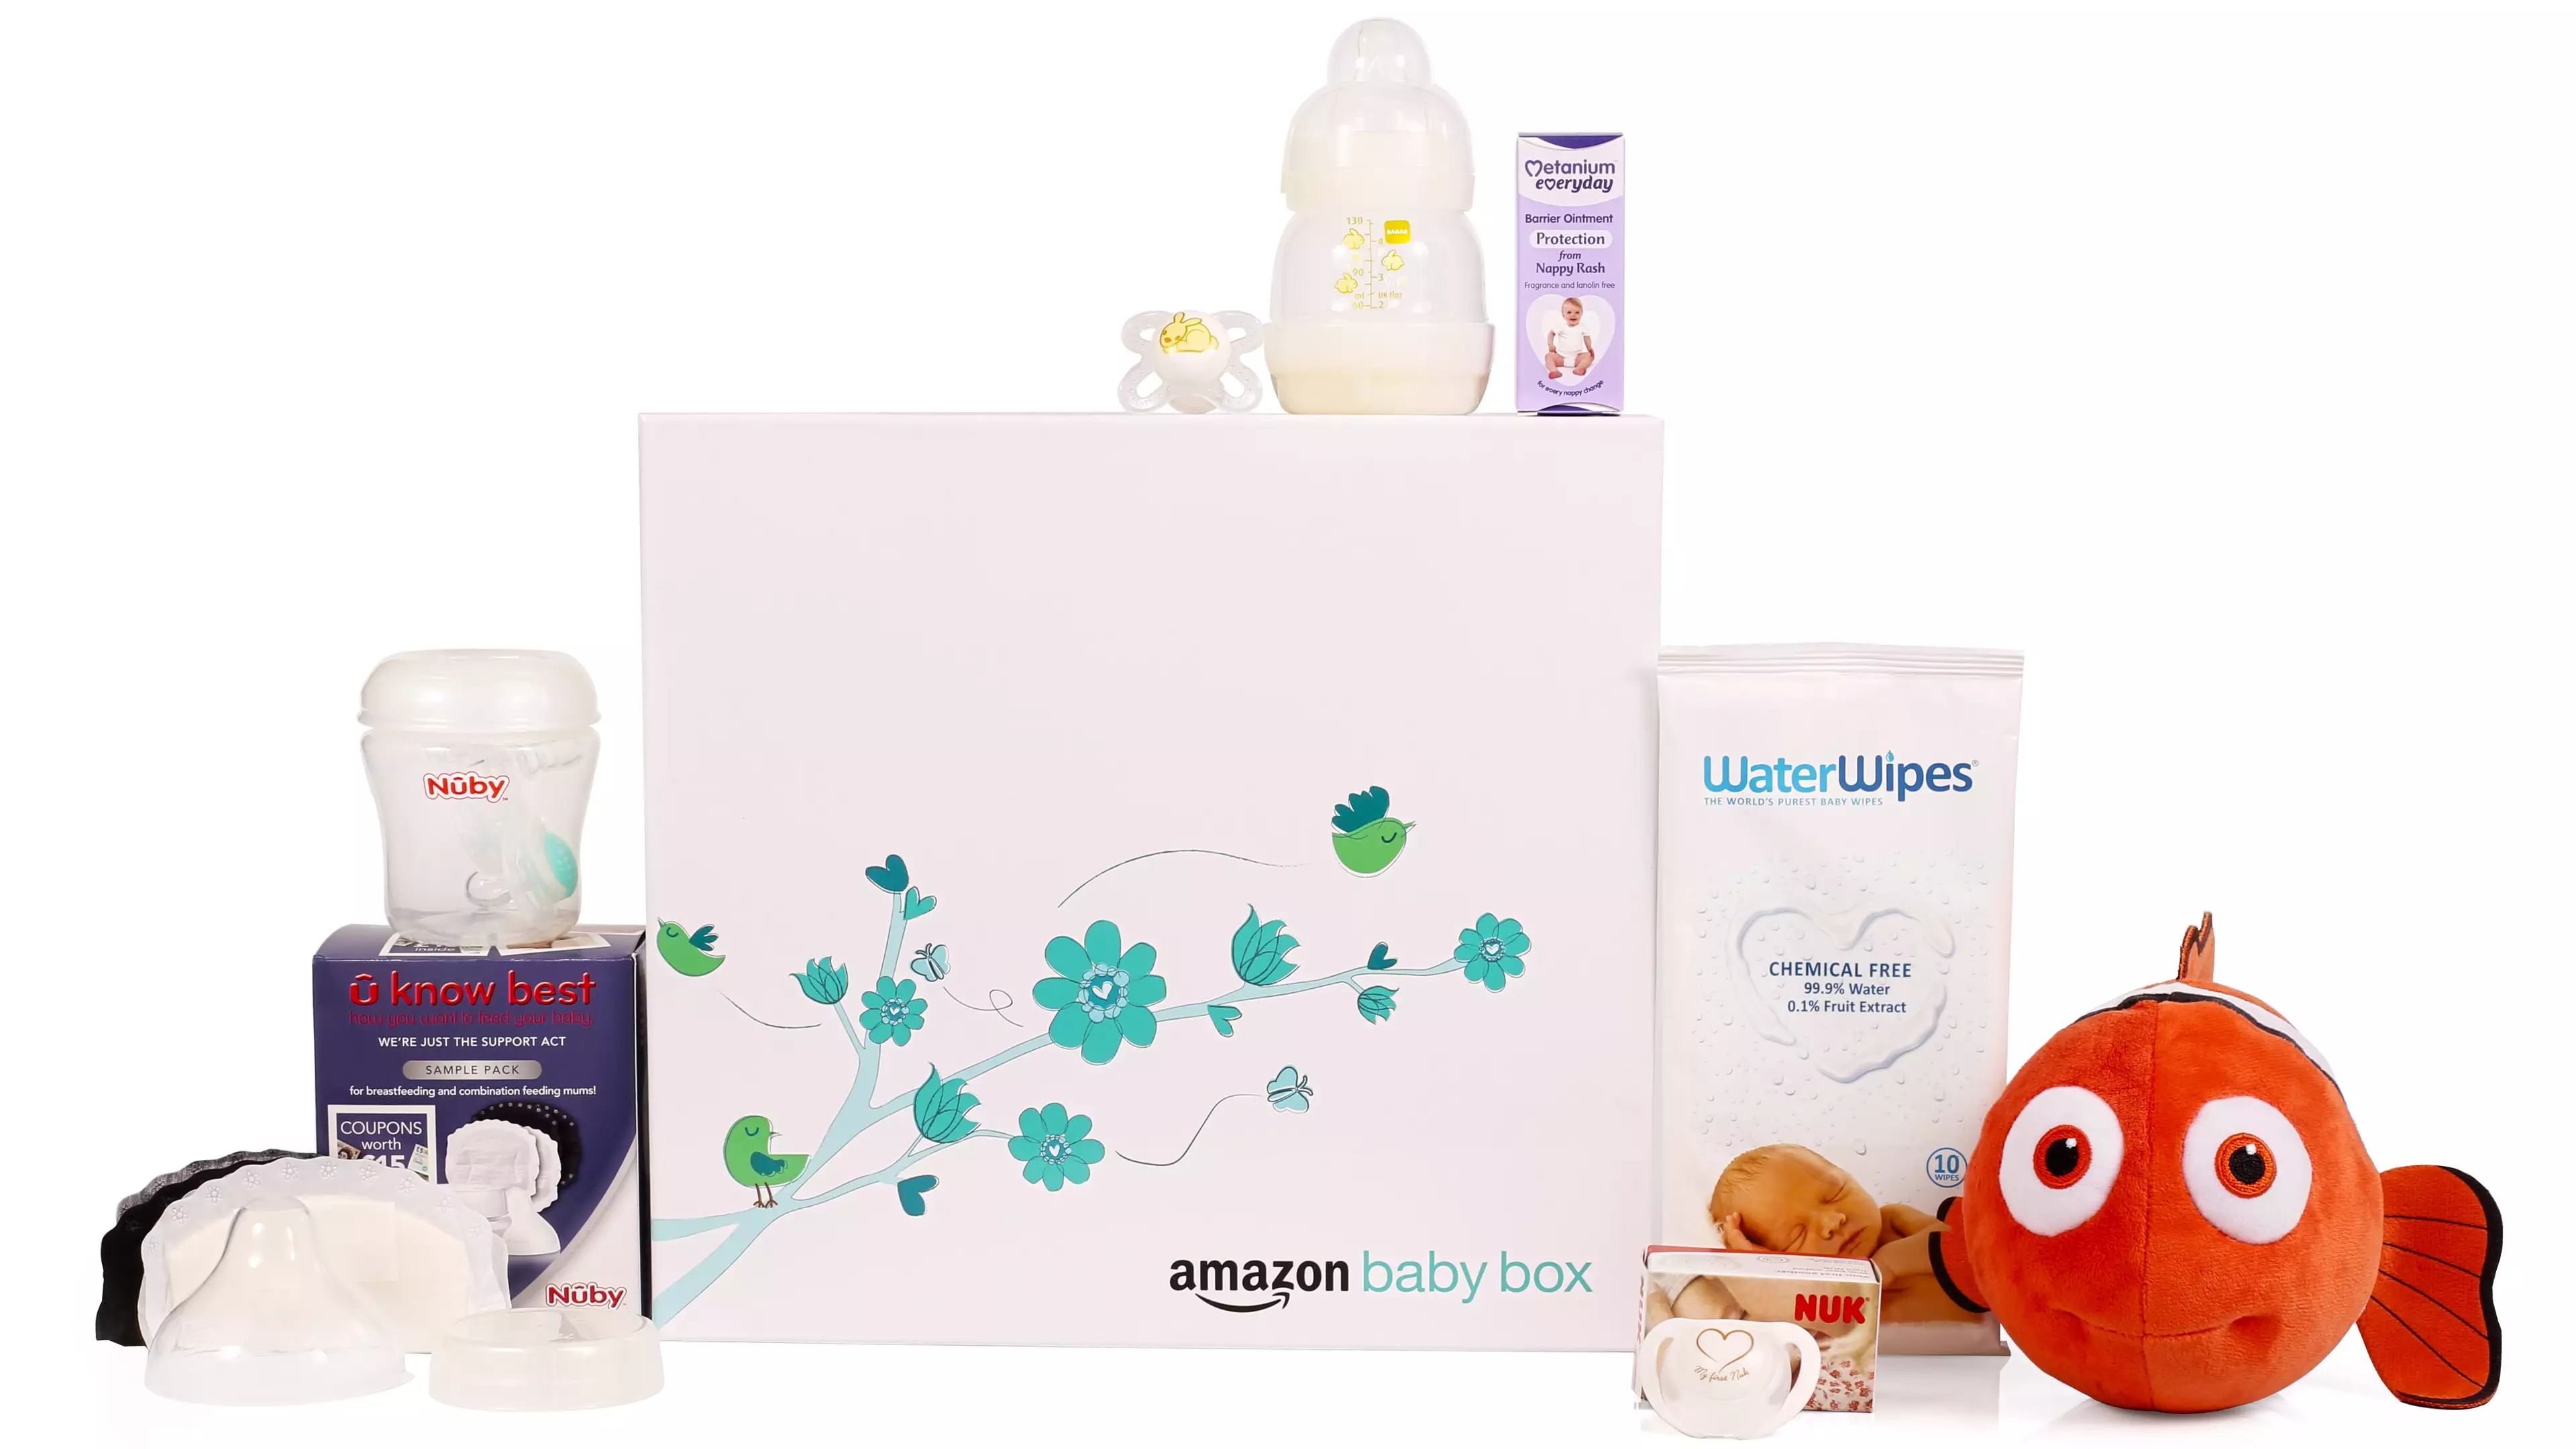 Amazon Are Giving Away Free Baby Bundles To New Parents